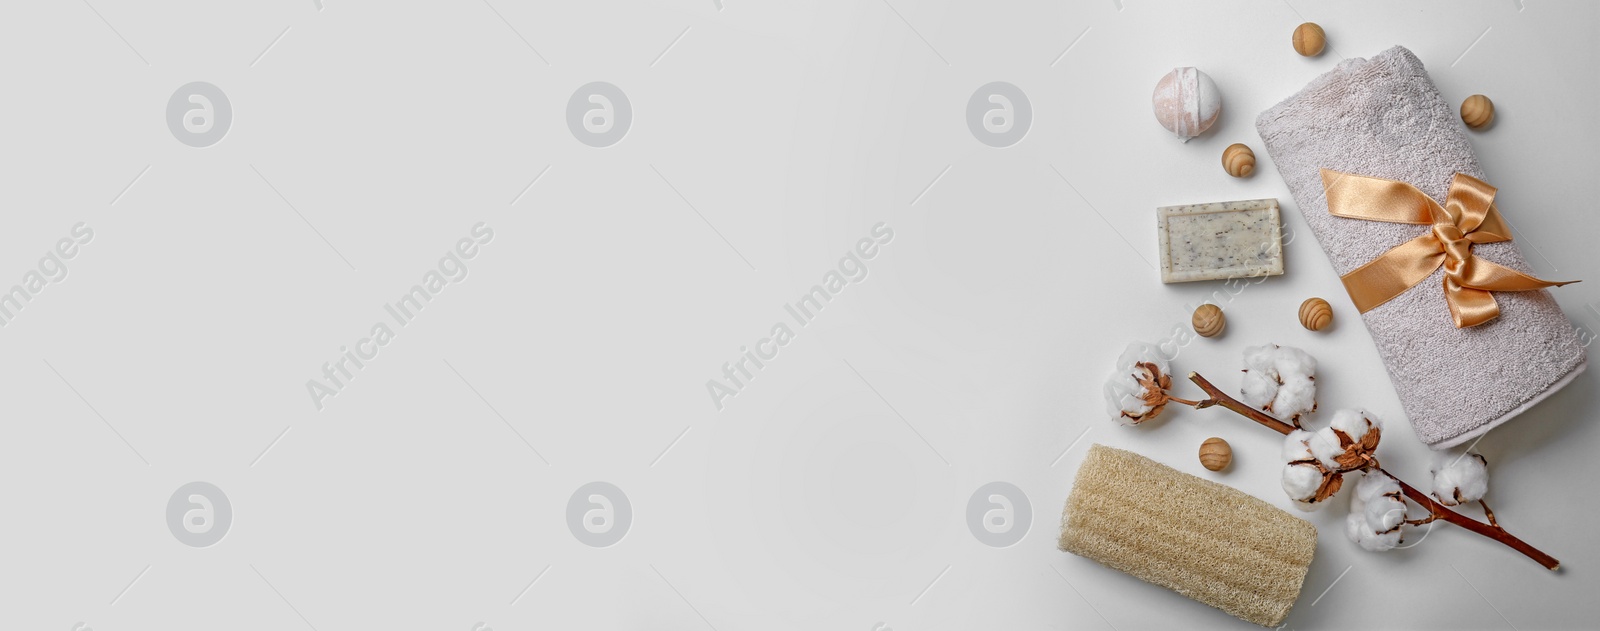 Image of Flat lay composition with towel and toiletries on light background, space for text. Banner design